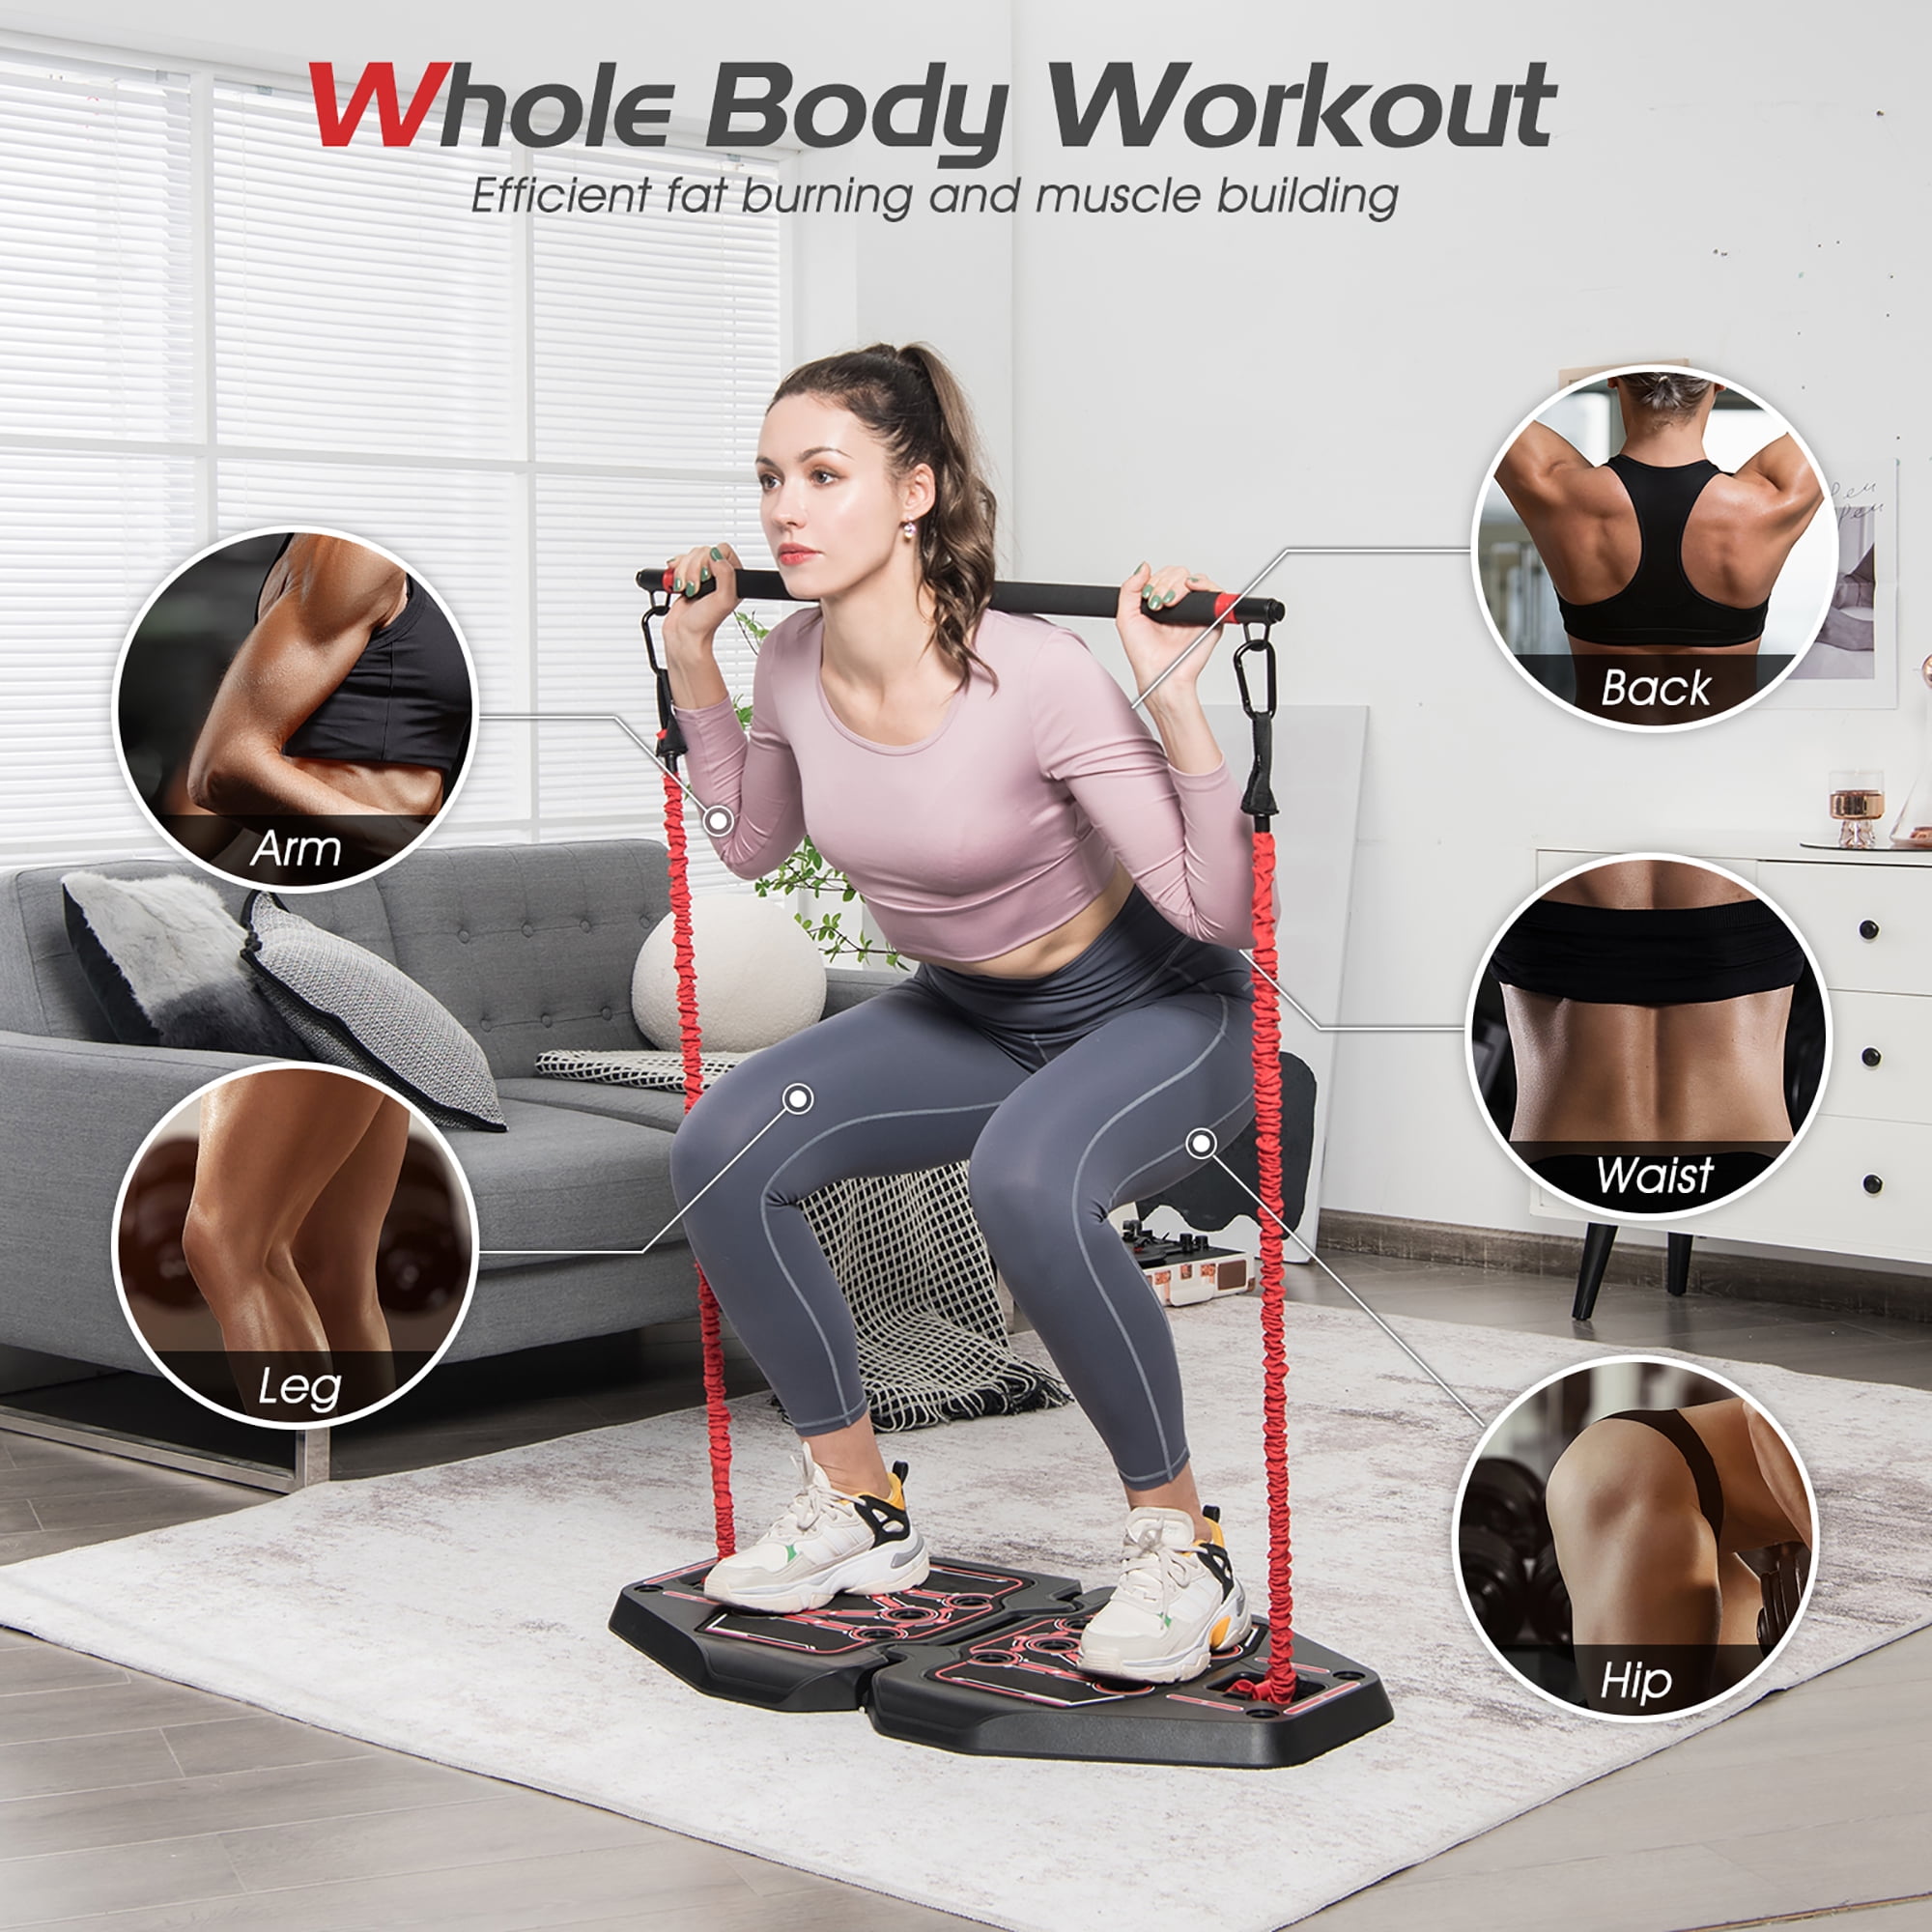  Home Workout Equipment for Women. Home Gym Equipment. Home  Exercise Equipment Women. Portable Workout Home. Total Body Workout. Travel  Gym. Crossfit Equipment. Home Fitness Equipment